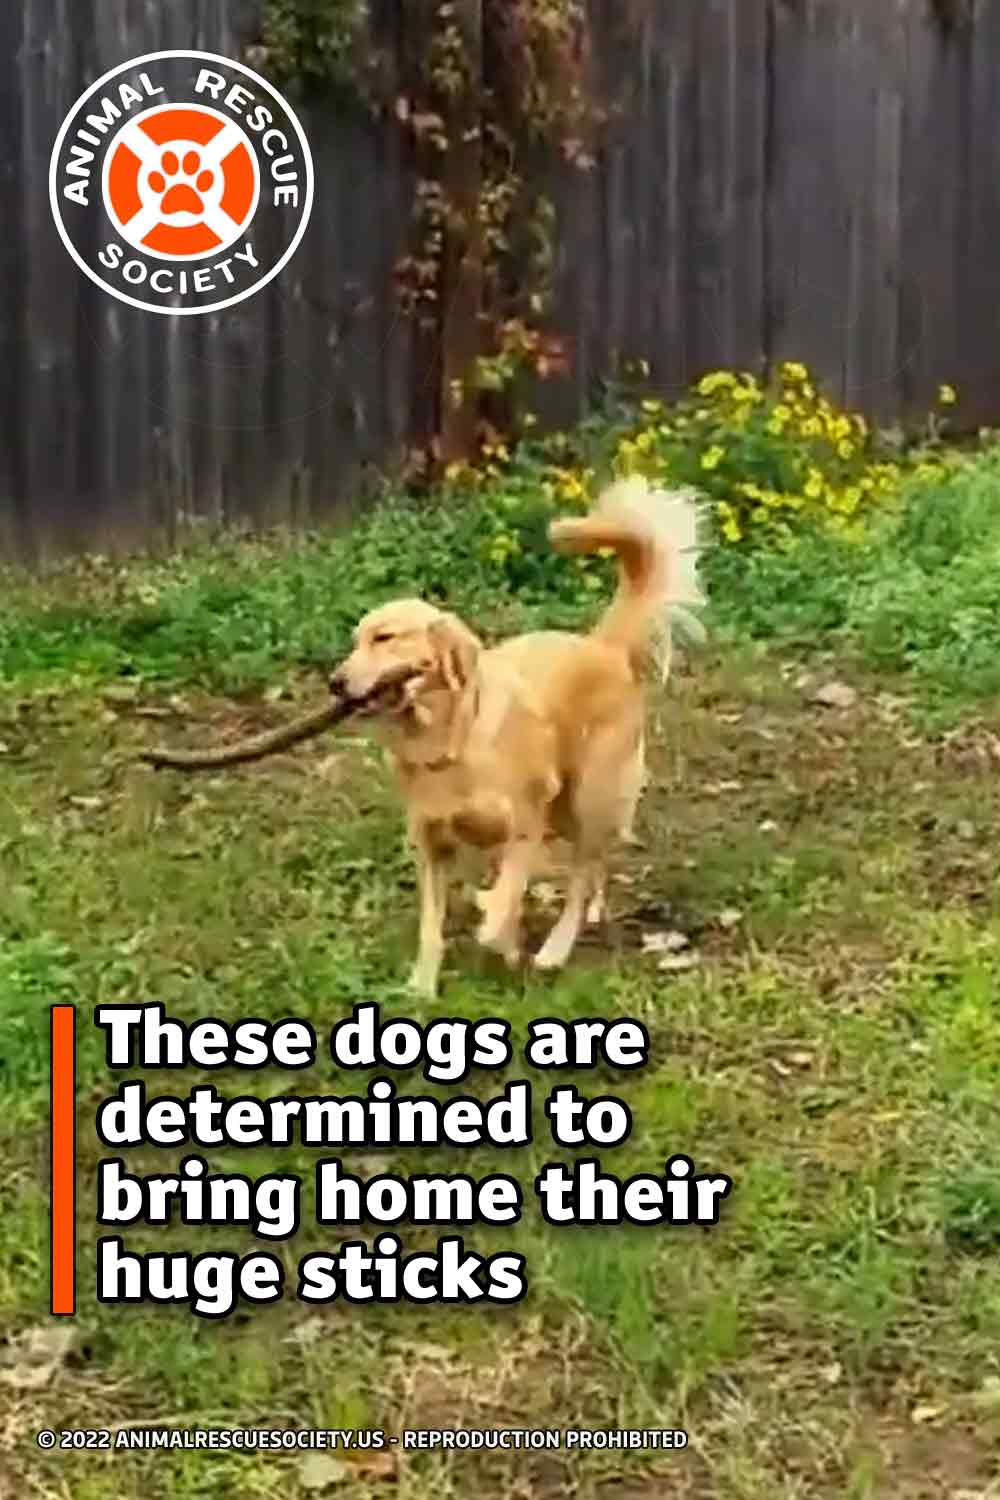 These dogs are determined to bring home their huge sticks